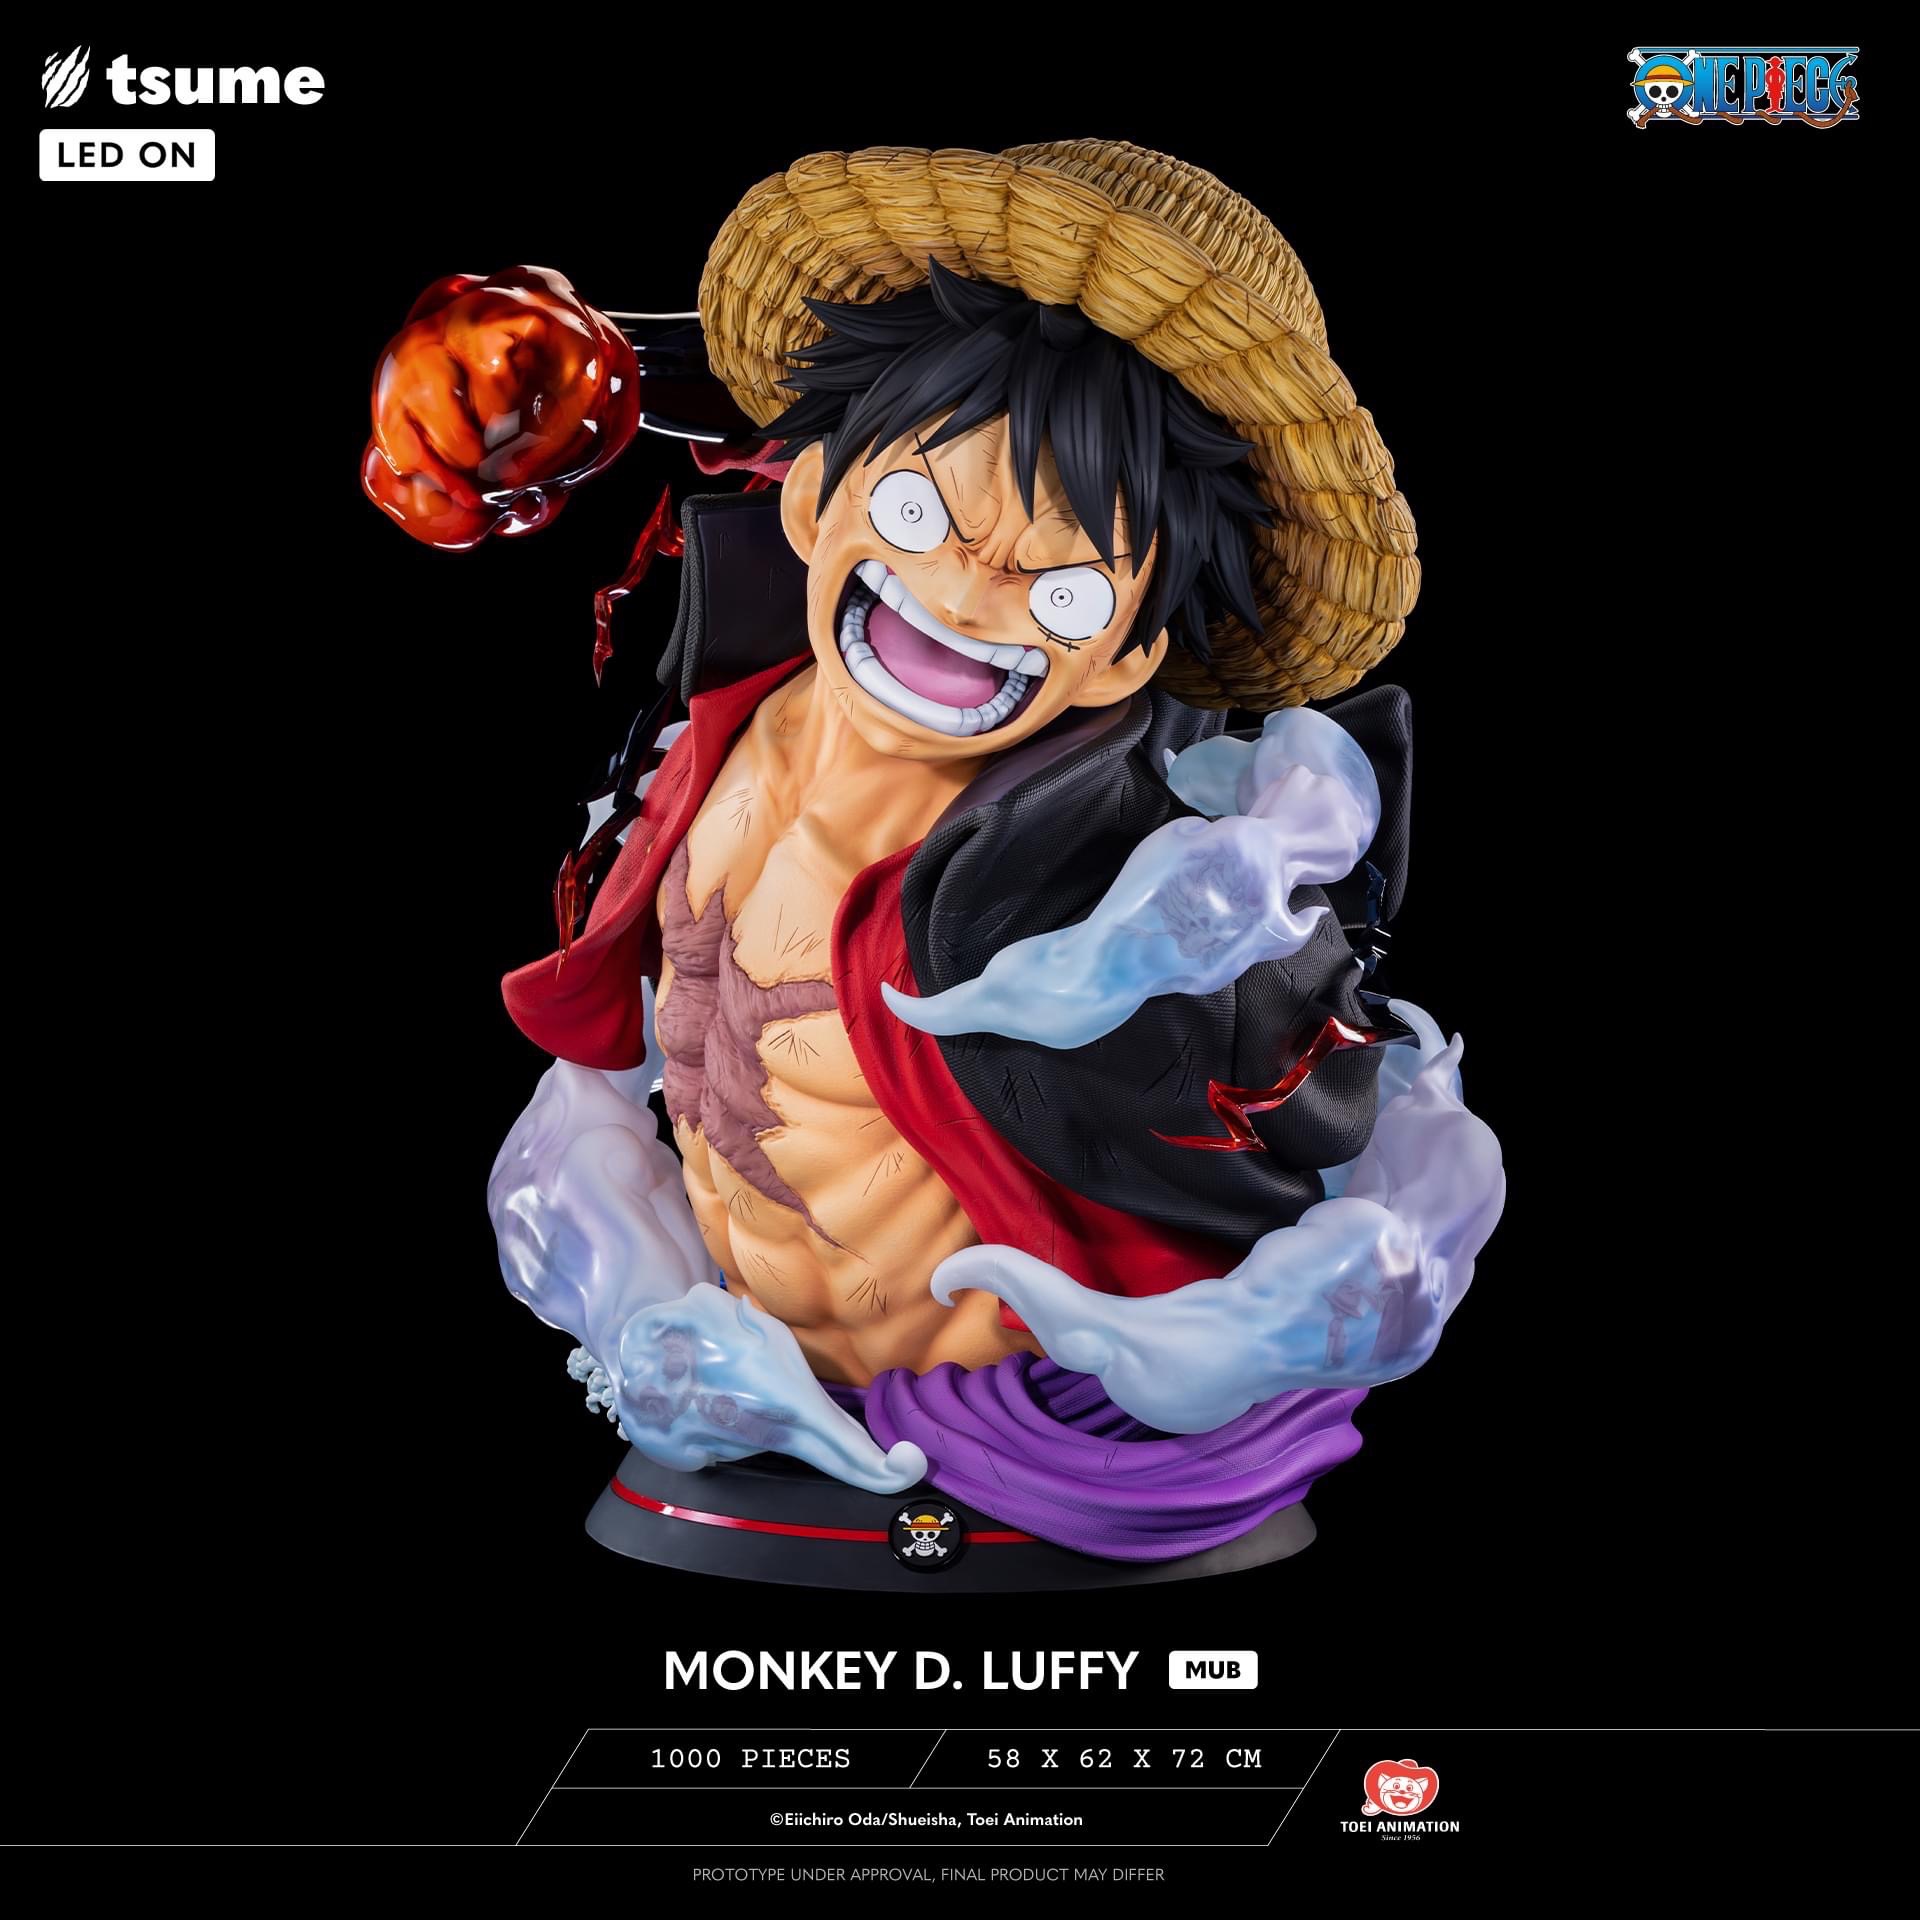 Monkey D. Luffy Bust by Tsume Art (มัดจำ) [[SOLD OUT]]